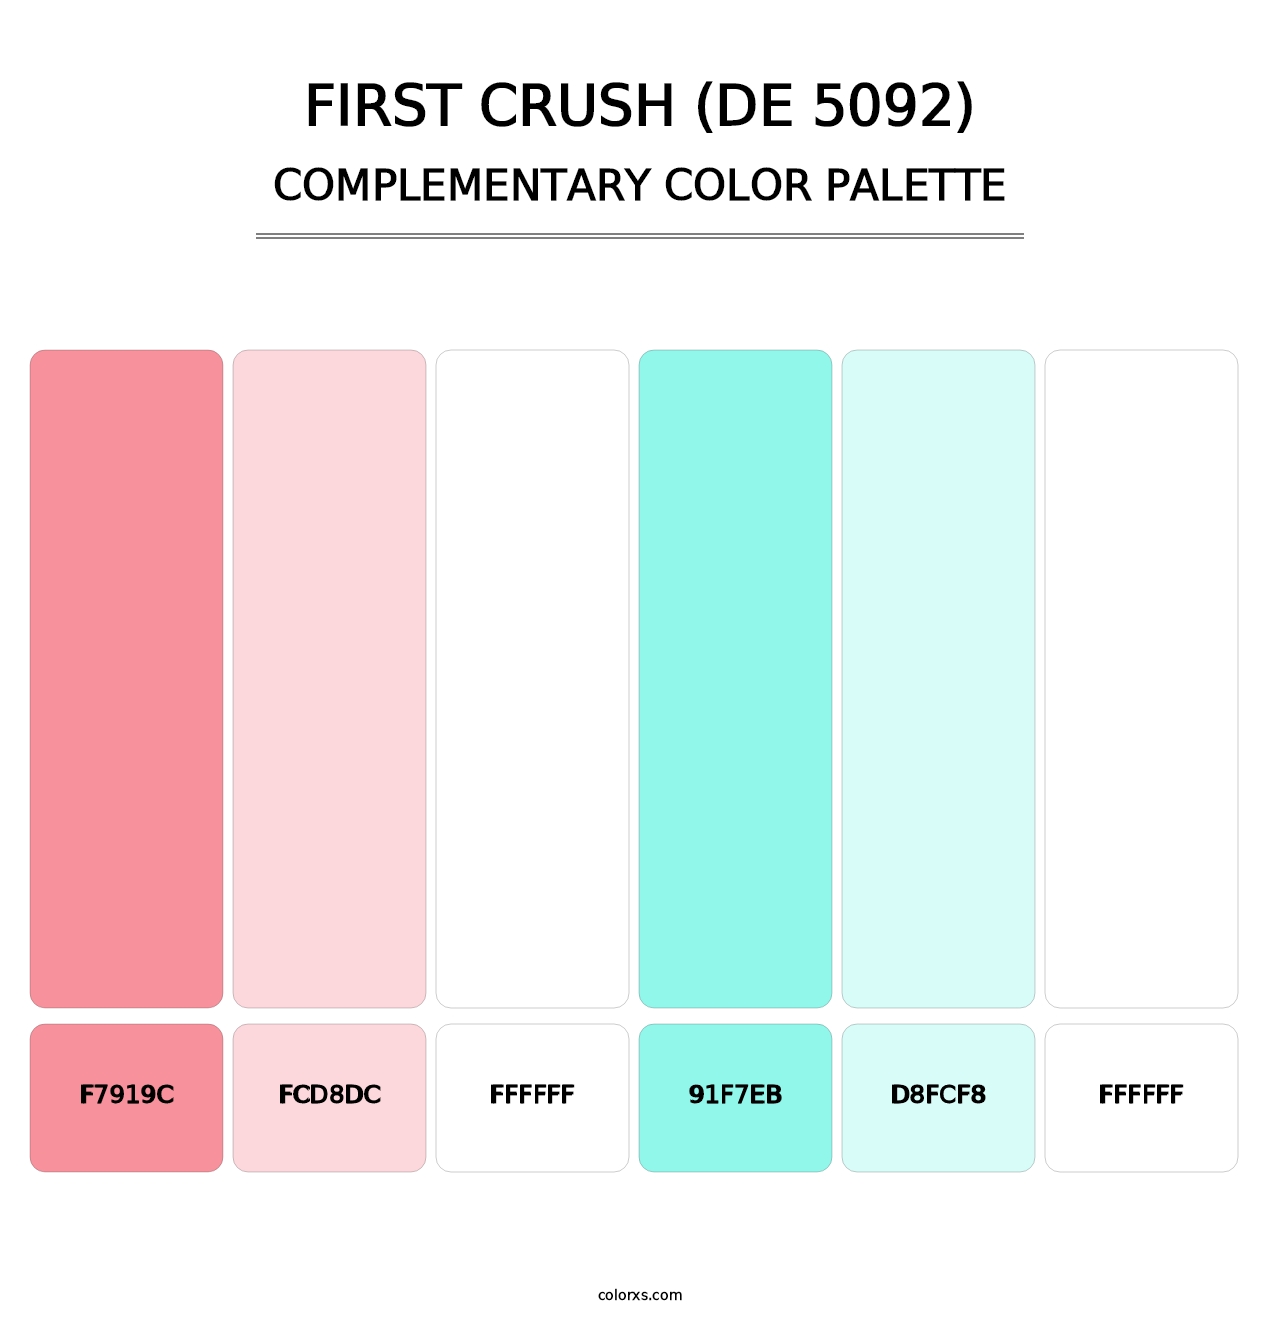 First Crush (DE 5092) - Complementary Color Palette